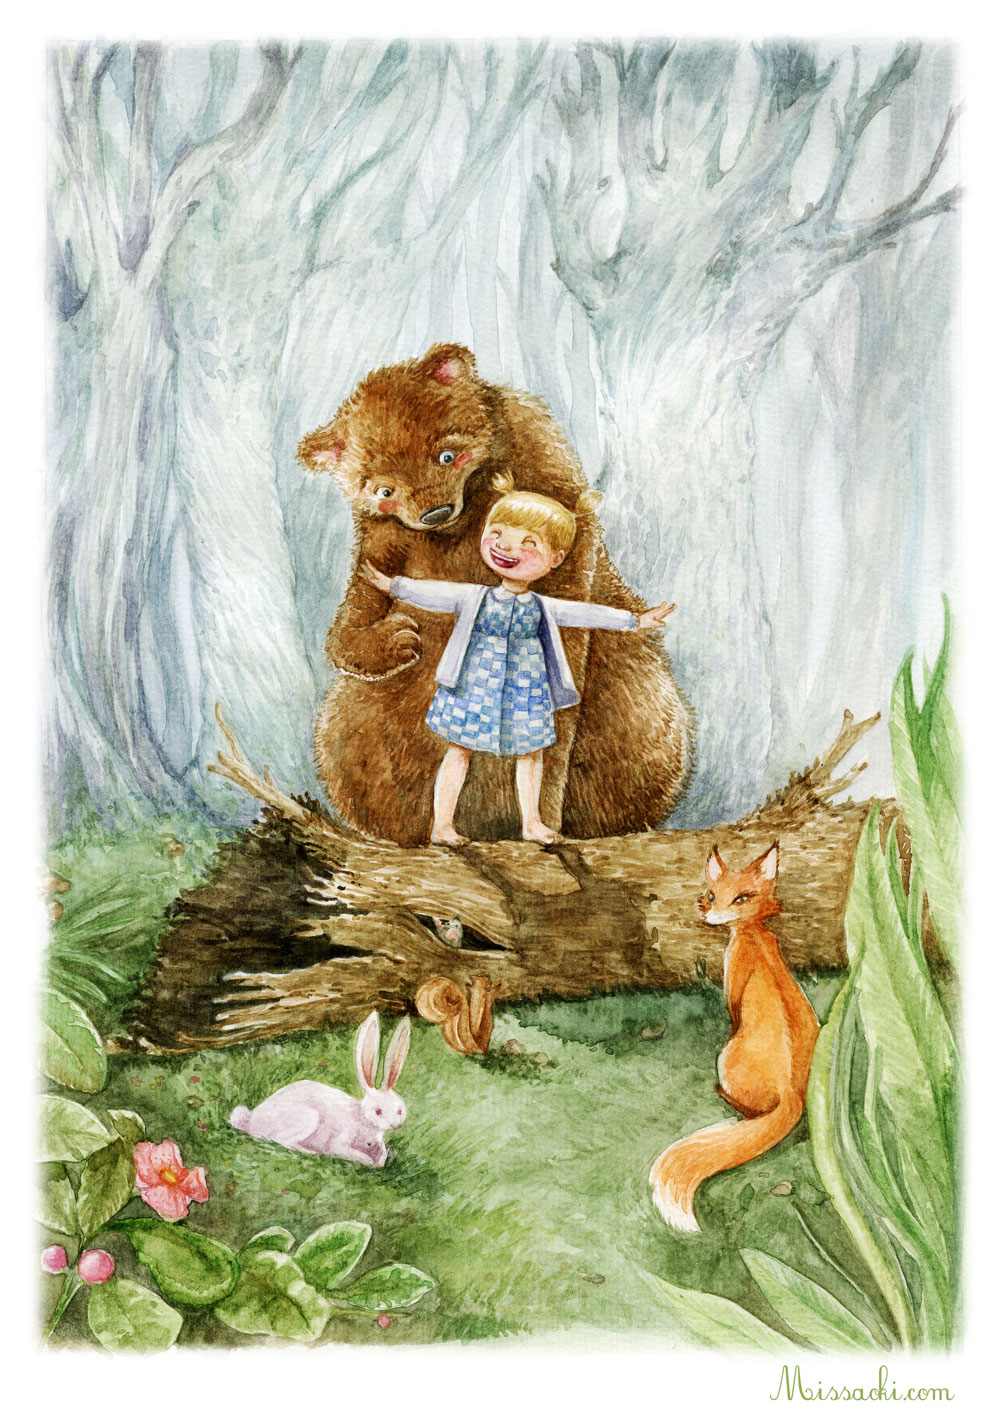 Ilustración "My forest friends" by Miss Aoki